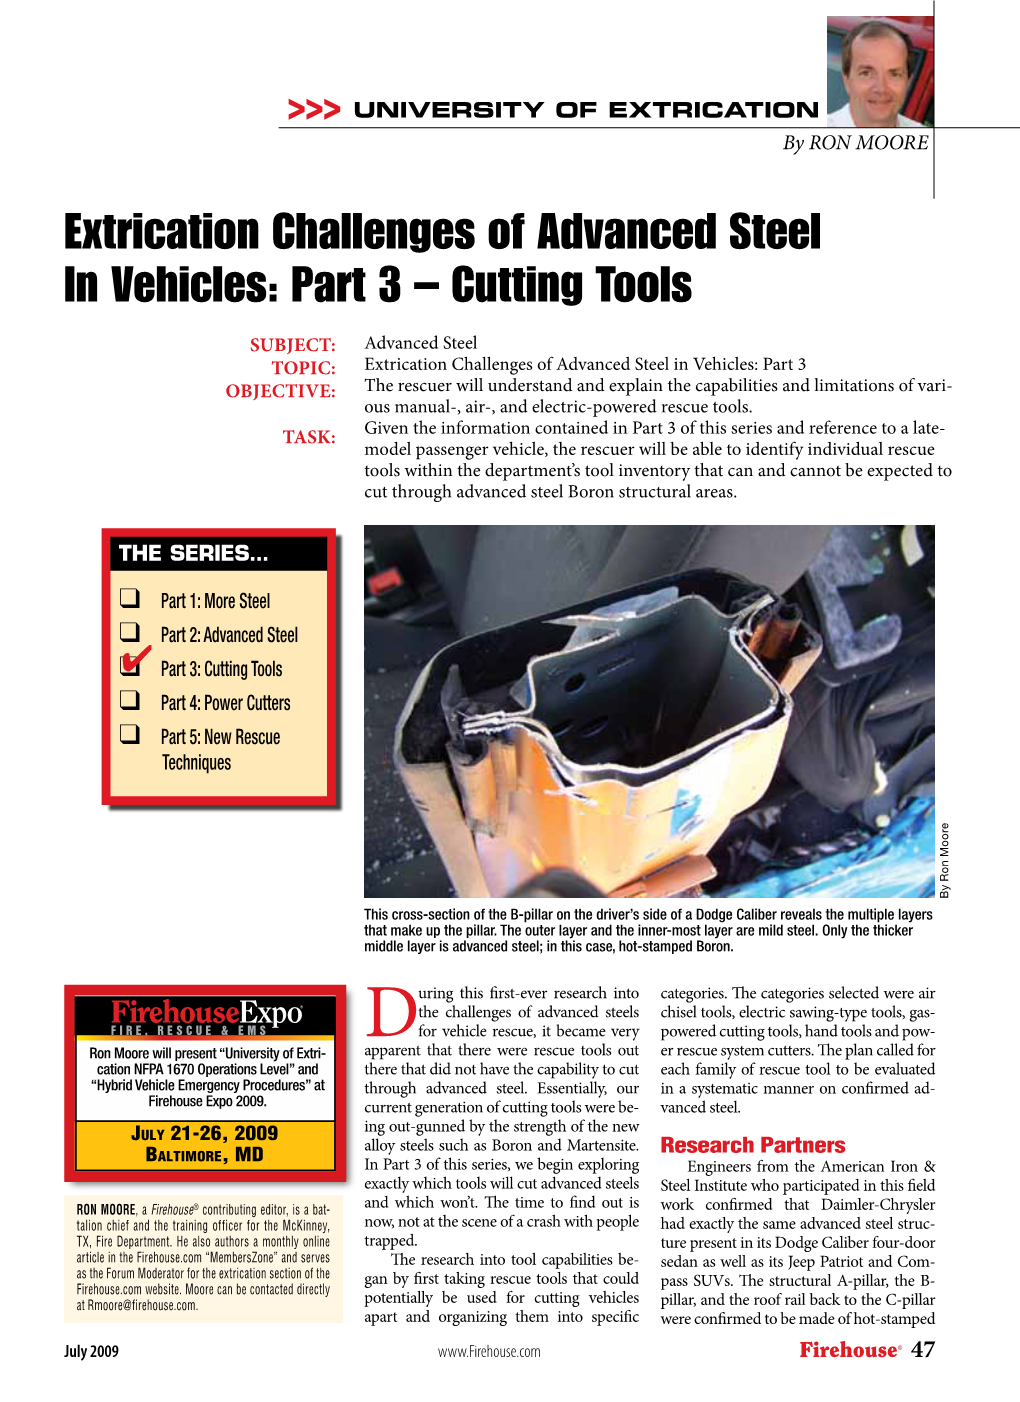 Extrication Challenges of Advanced Steel in Vehicles: Part 3 – Cutting Tools